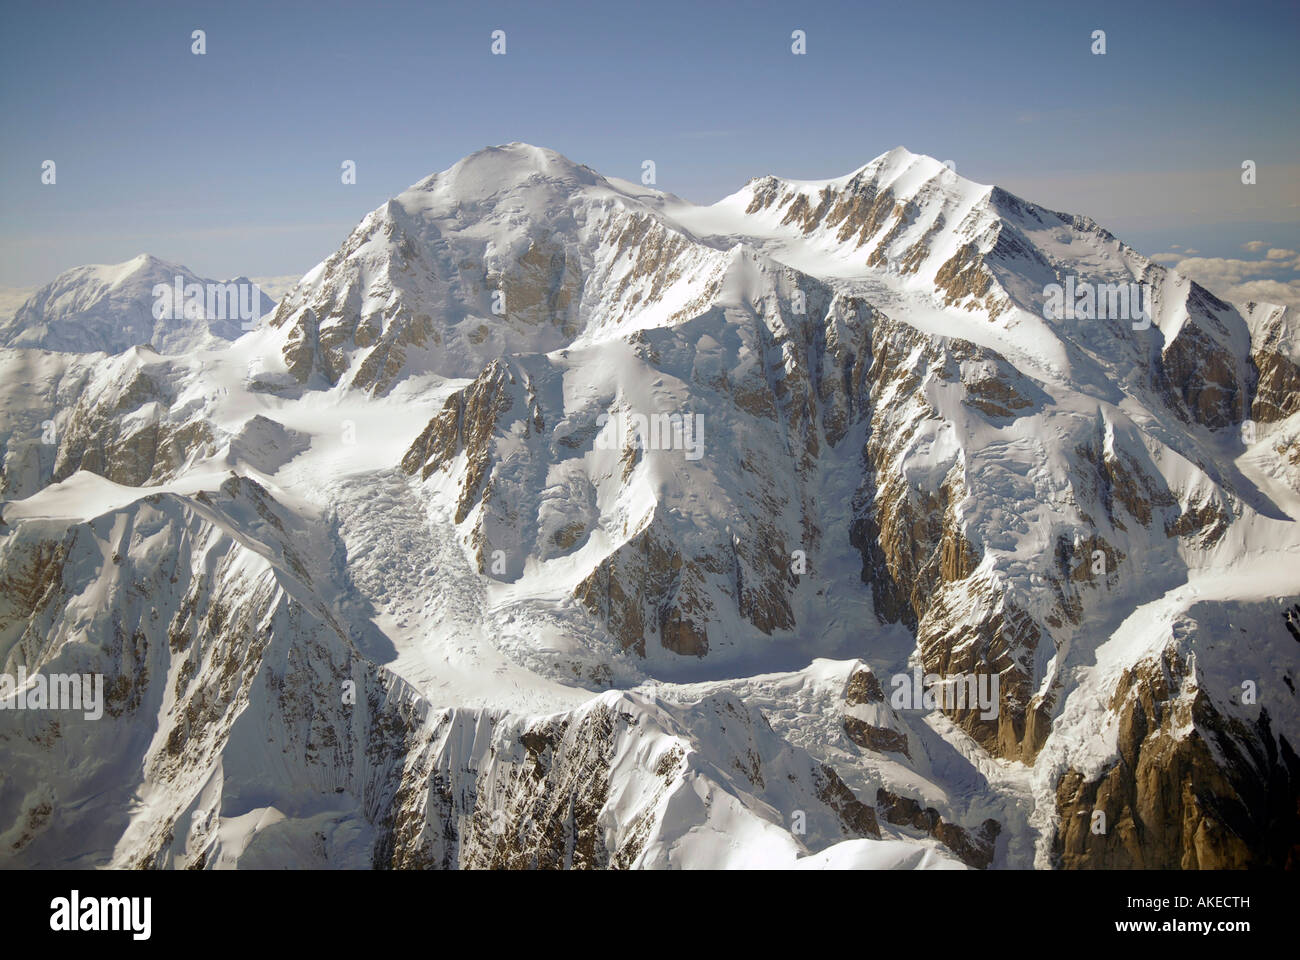 Aerial Views of Mt McKinley Denali National Park Alaska AK U S United States snow covered mountains glaciers icefields Stock Photo